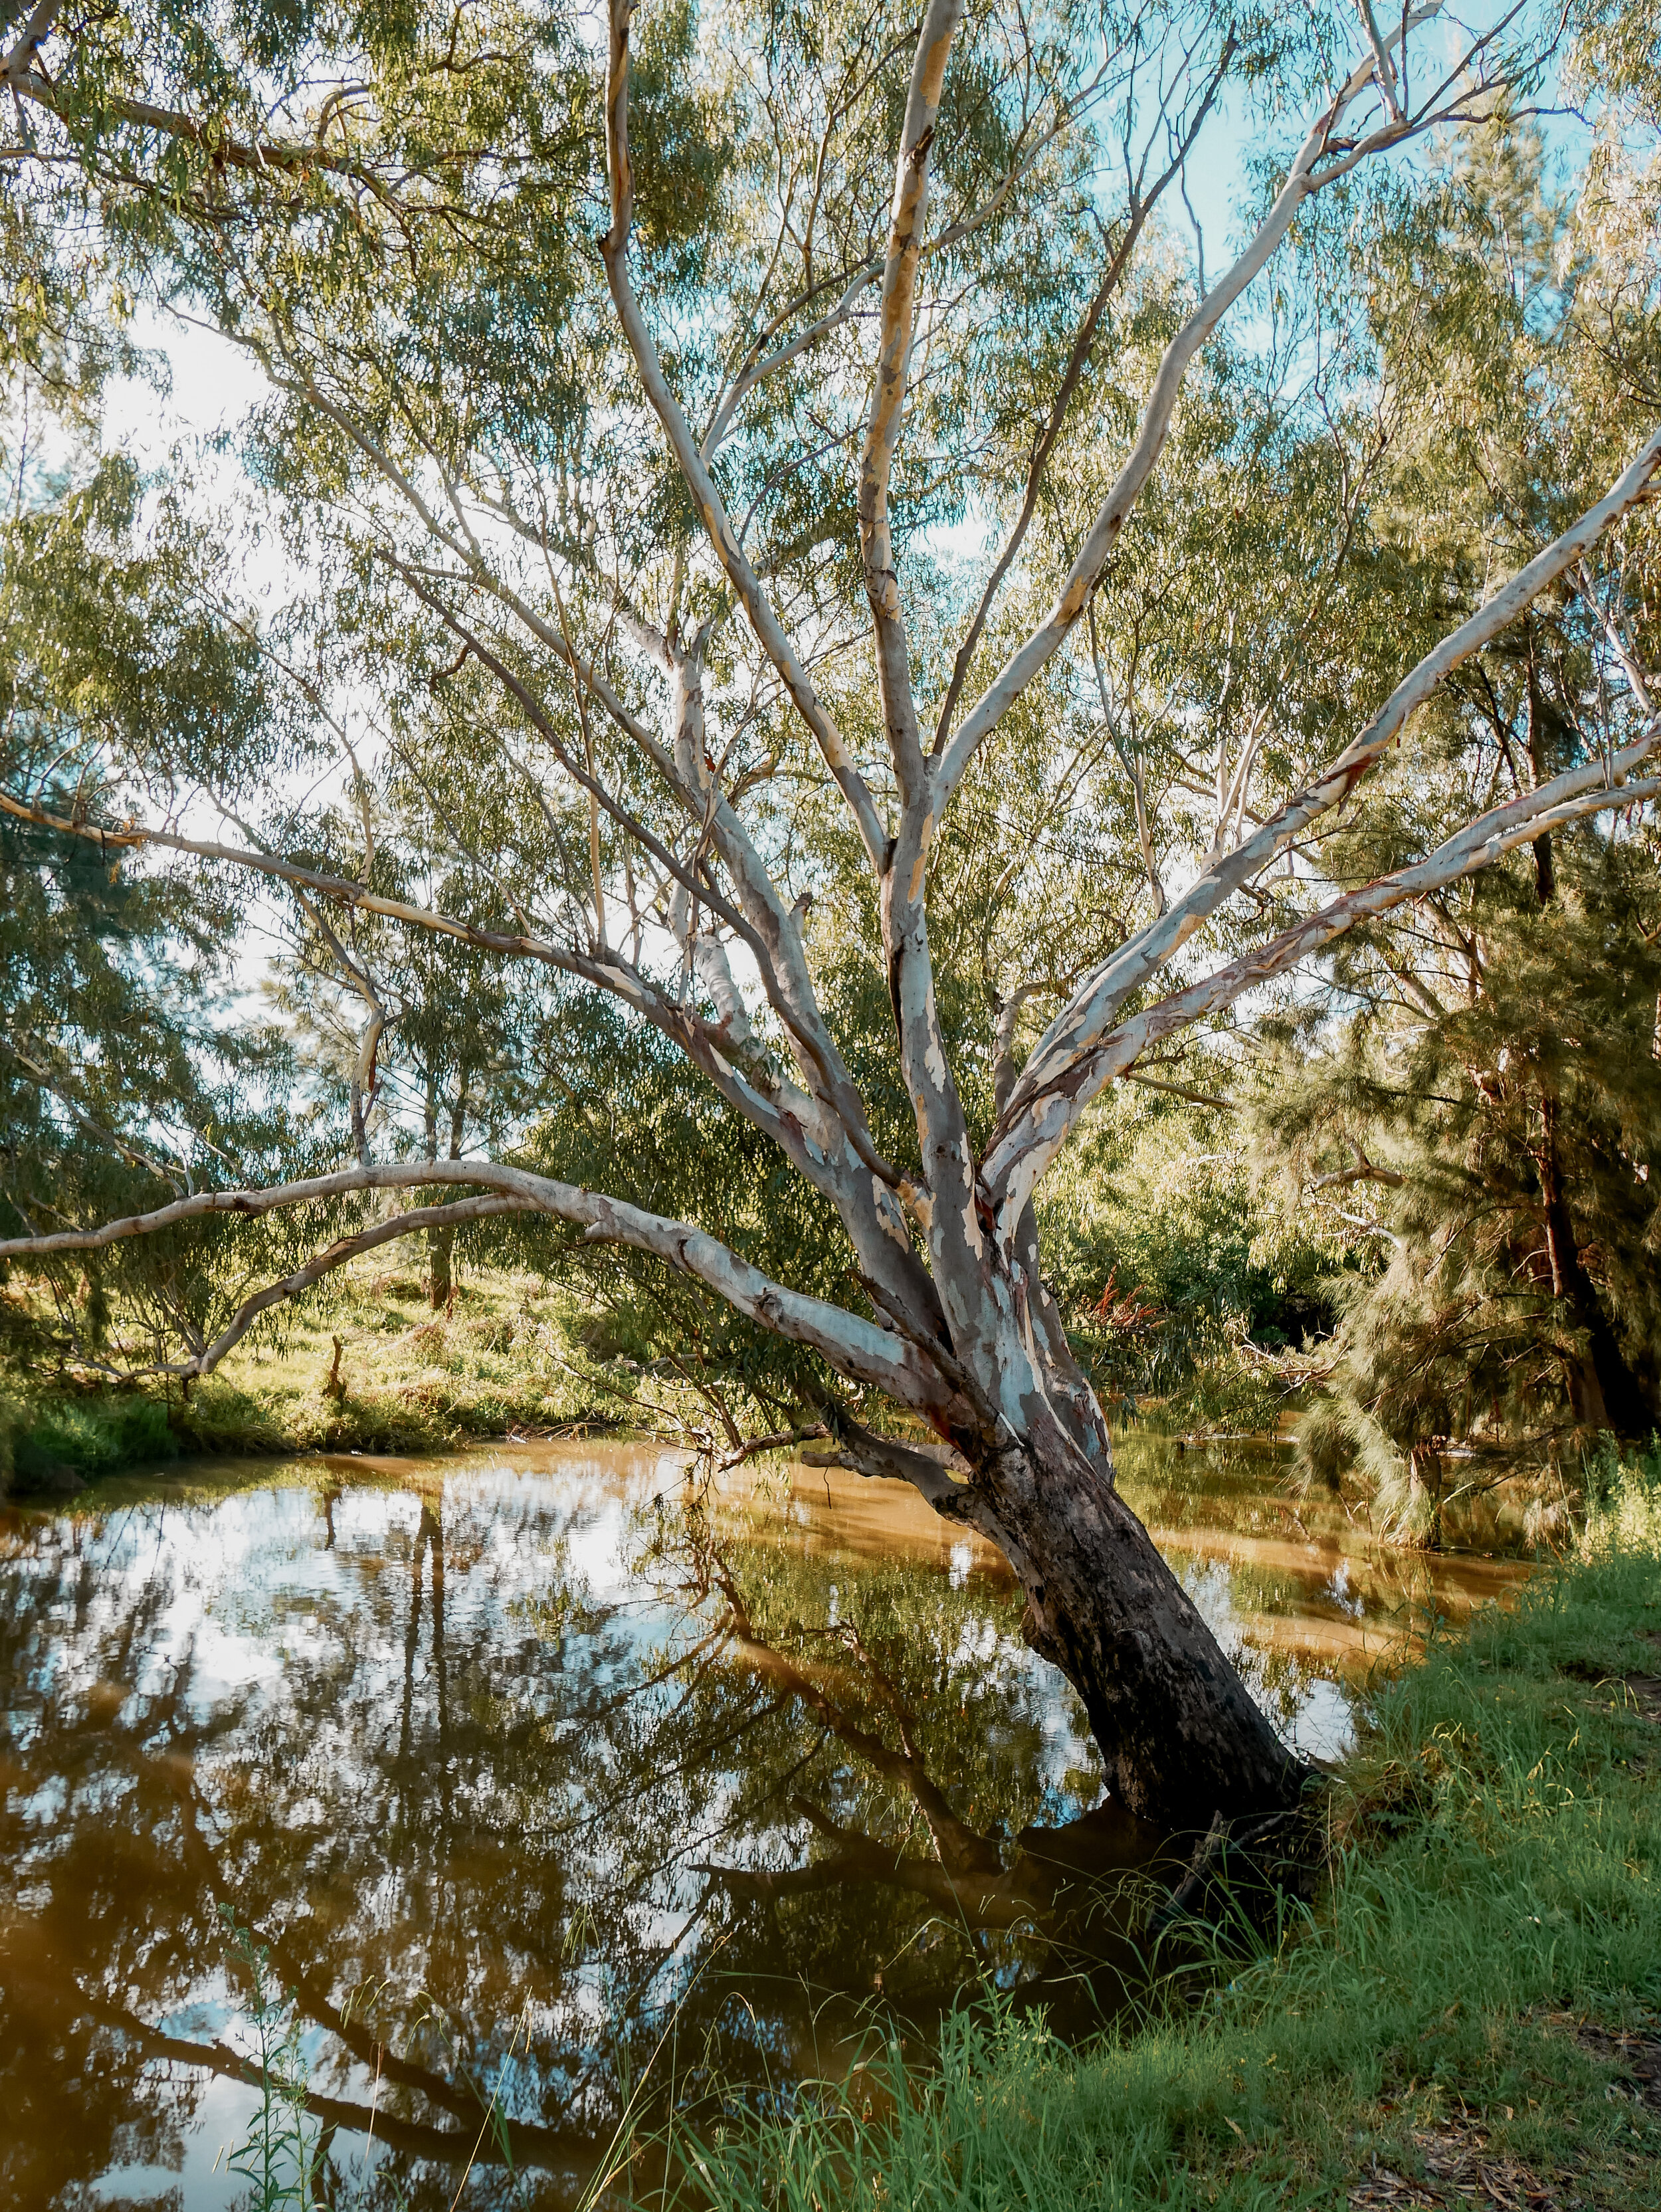 The sunlight and the river - Putta Bucca wetlands - Mudgee - New South Wales (NSW) - Australia